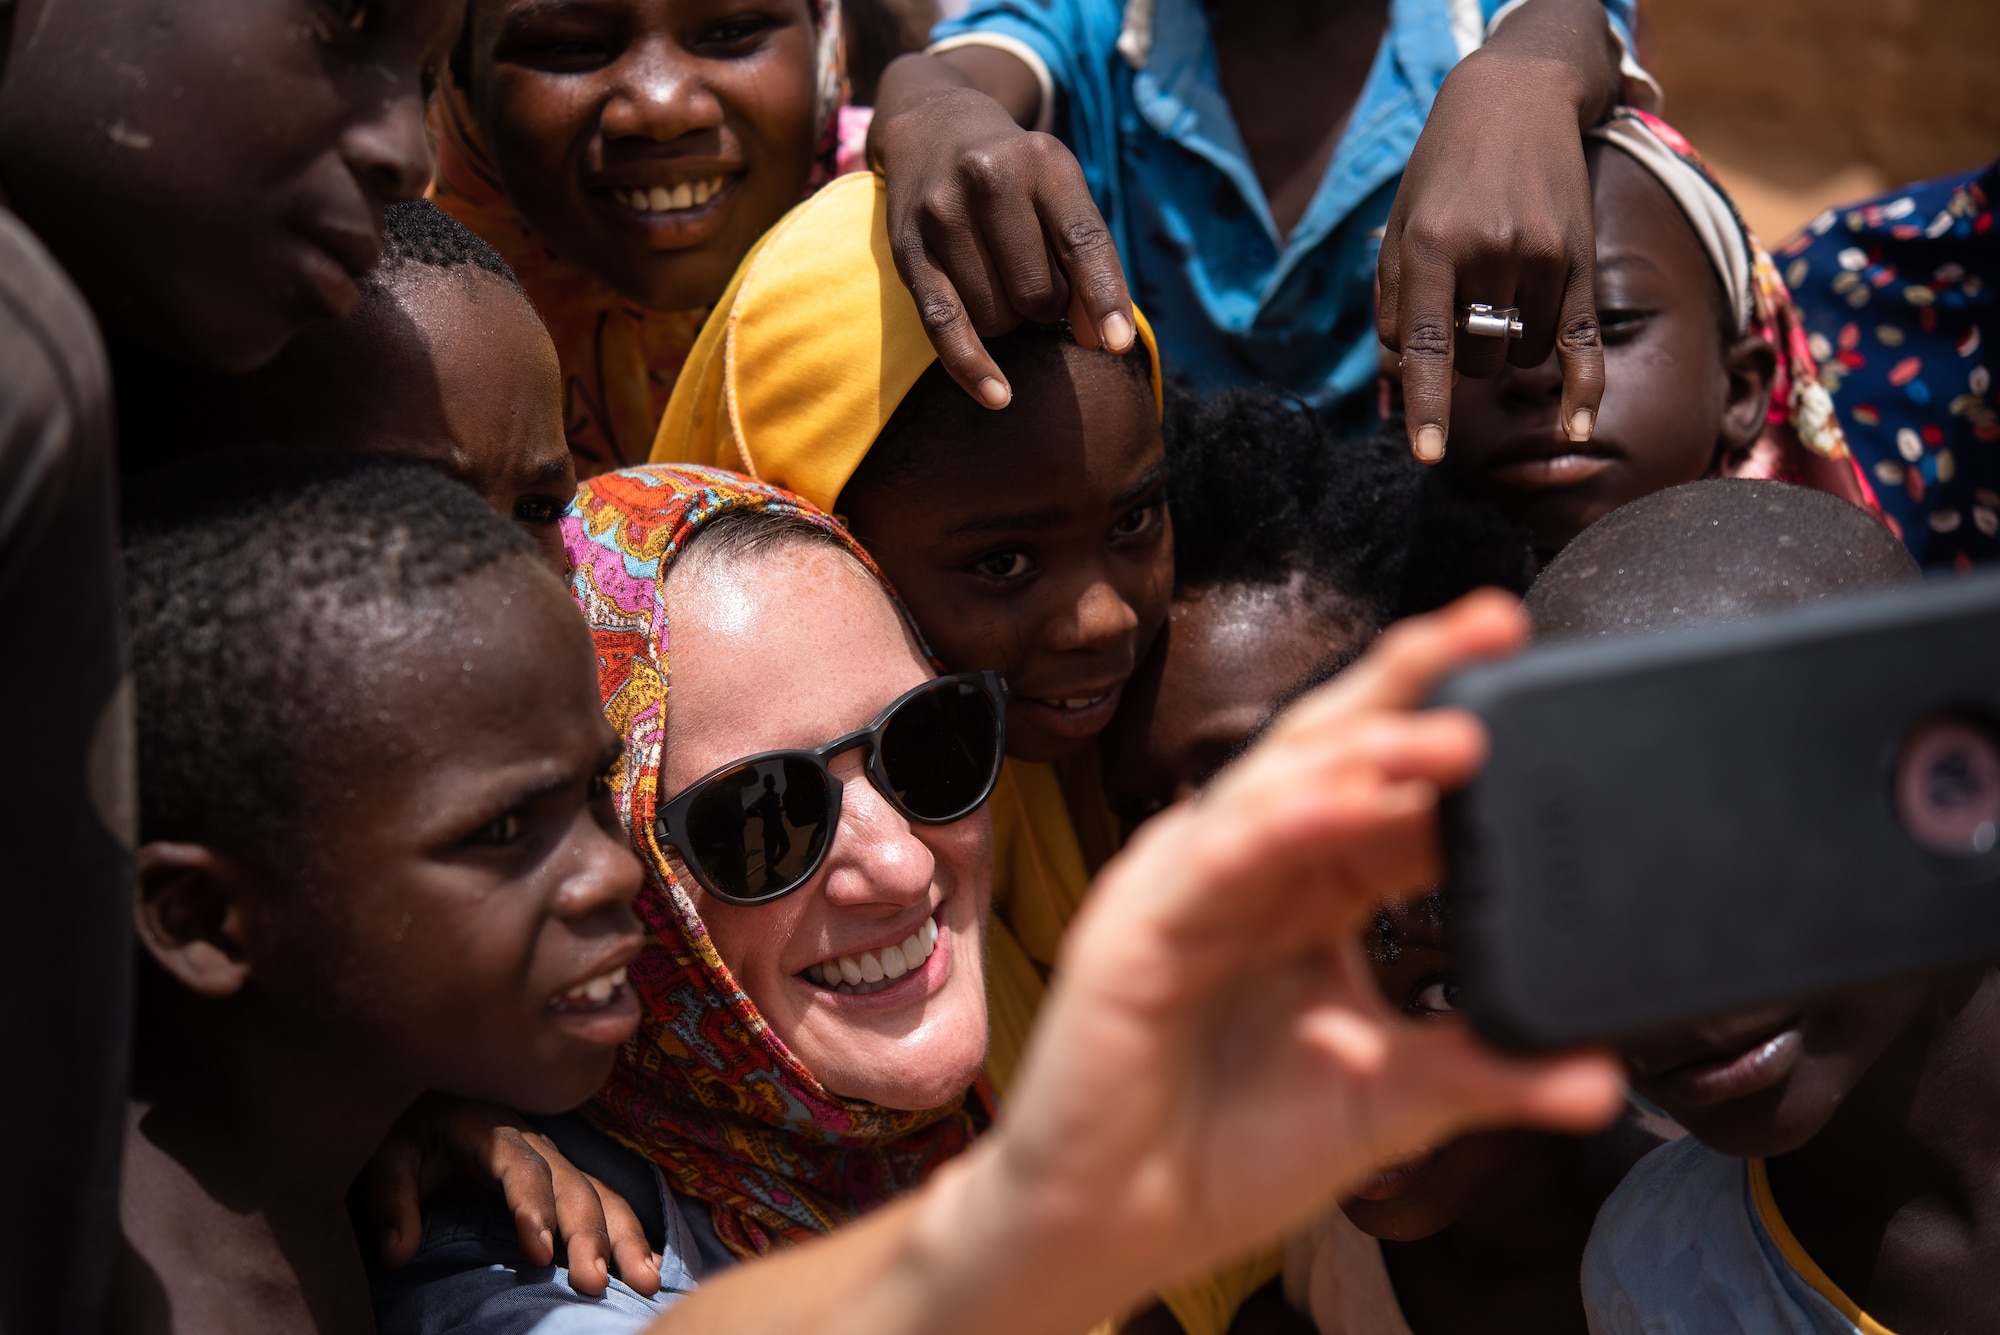 U.S. Army Staff Sgt. Cana Garrison, Civil Affairs Team 204, takes a selfie with Nigerien children at a village in Agadez, Niger, June 27, 2019. The civil affairs team reaches out to the local community on a weekly basis to strengthen the relationship between the Nigeriens and the U.S. military. (U.S. Air Force photo by Staff Sgt. Devin Boyer)